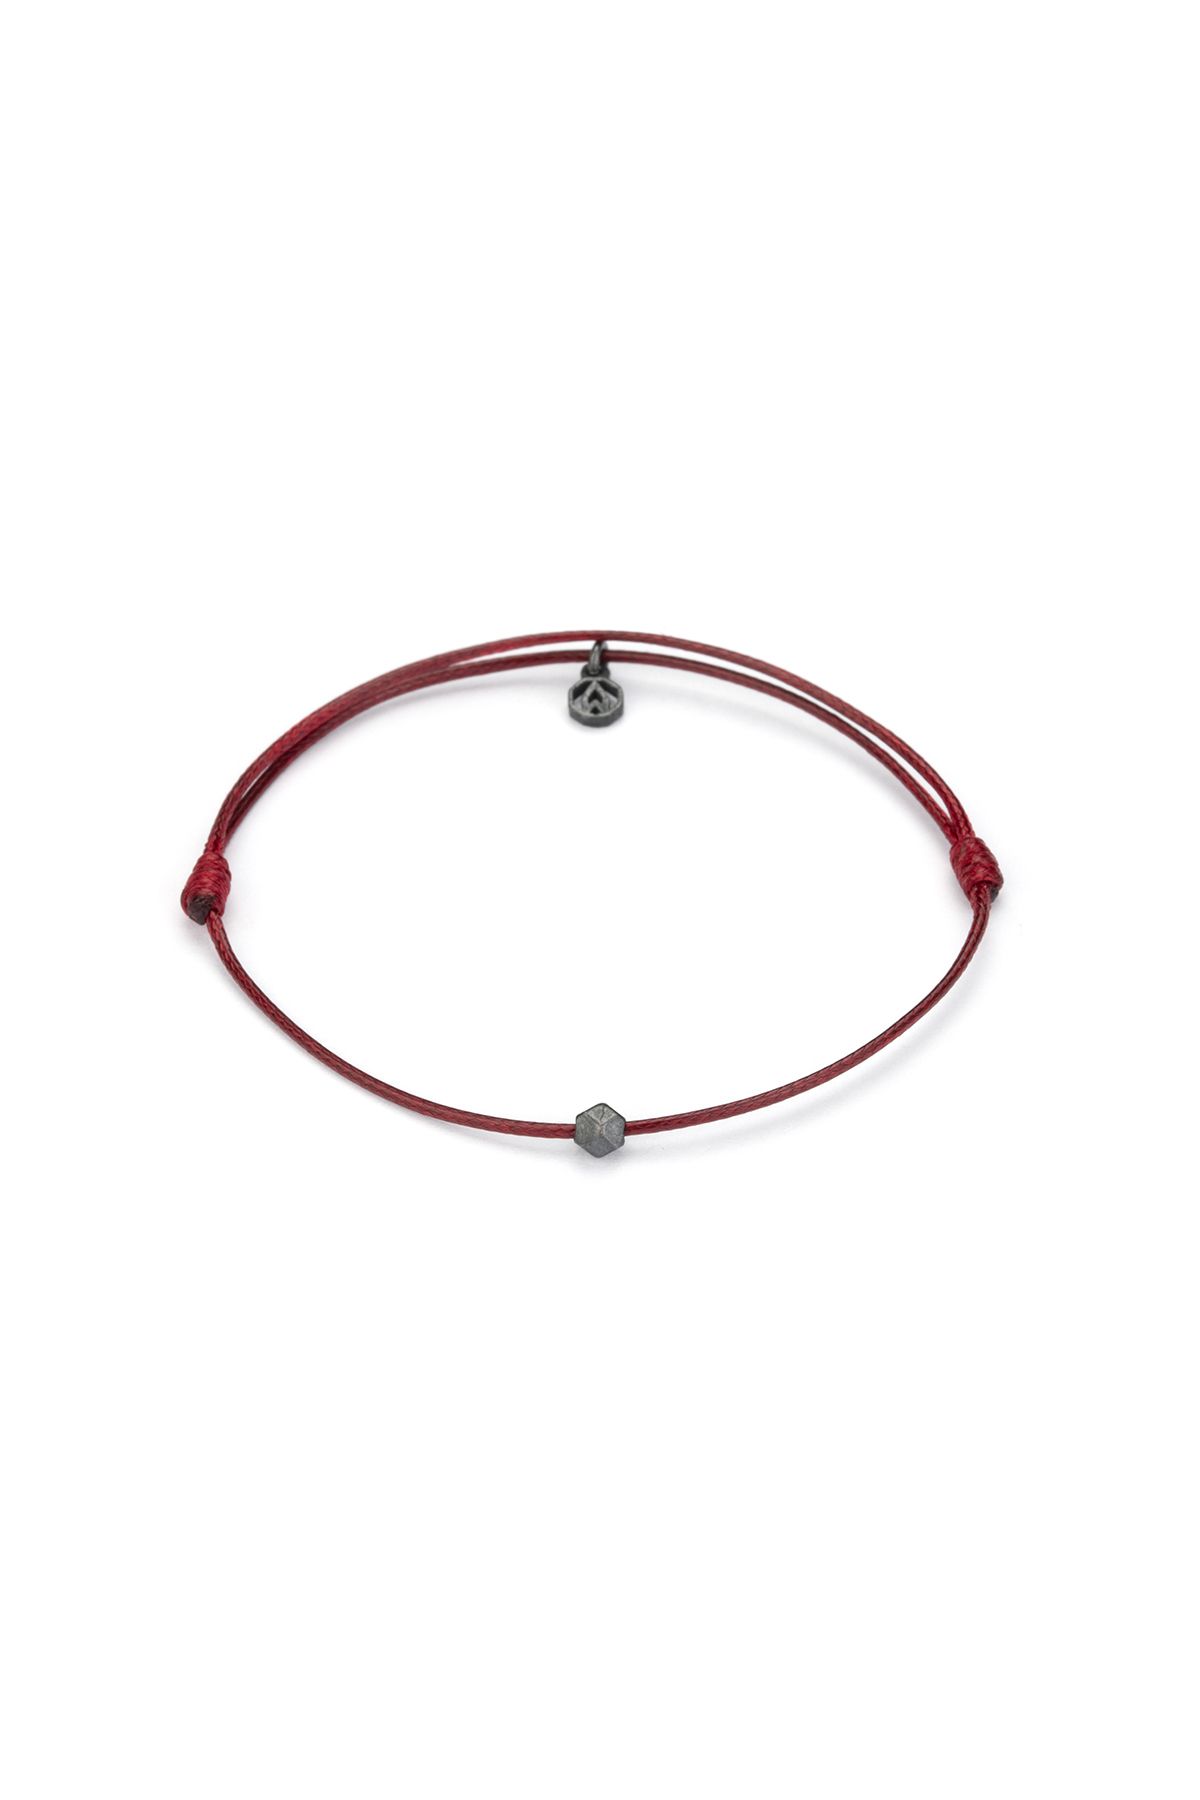 Atolyewolf Claret Red Chance Bracelet in Oxide